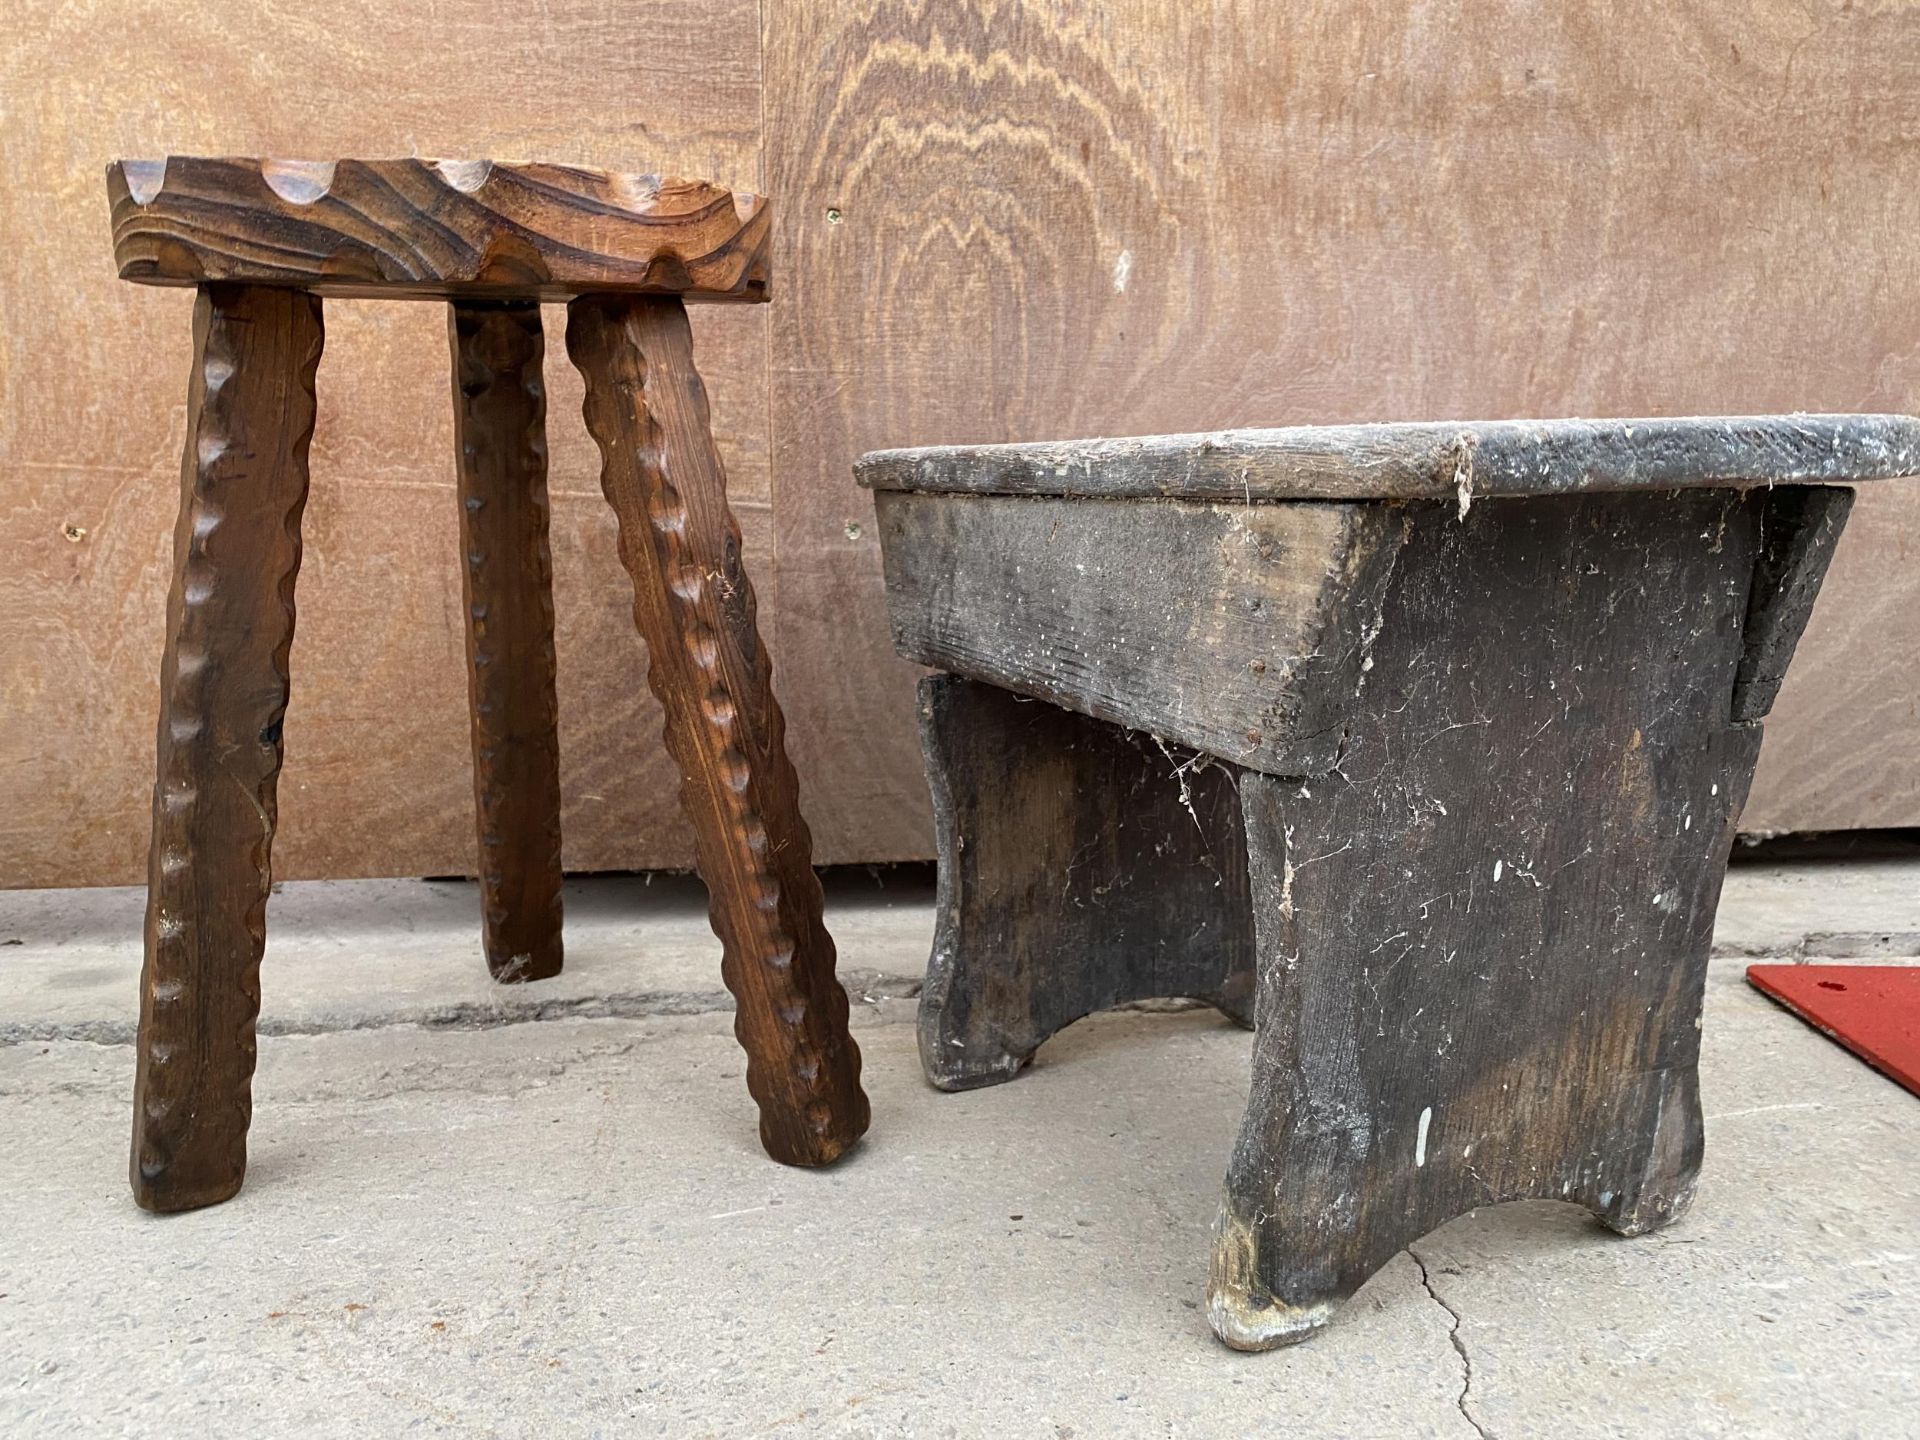 TWO VINTAGE WOODEN STOOLS - Image 2 of 3